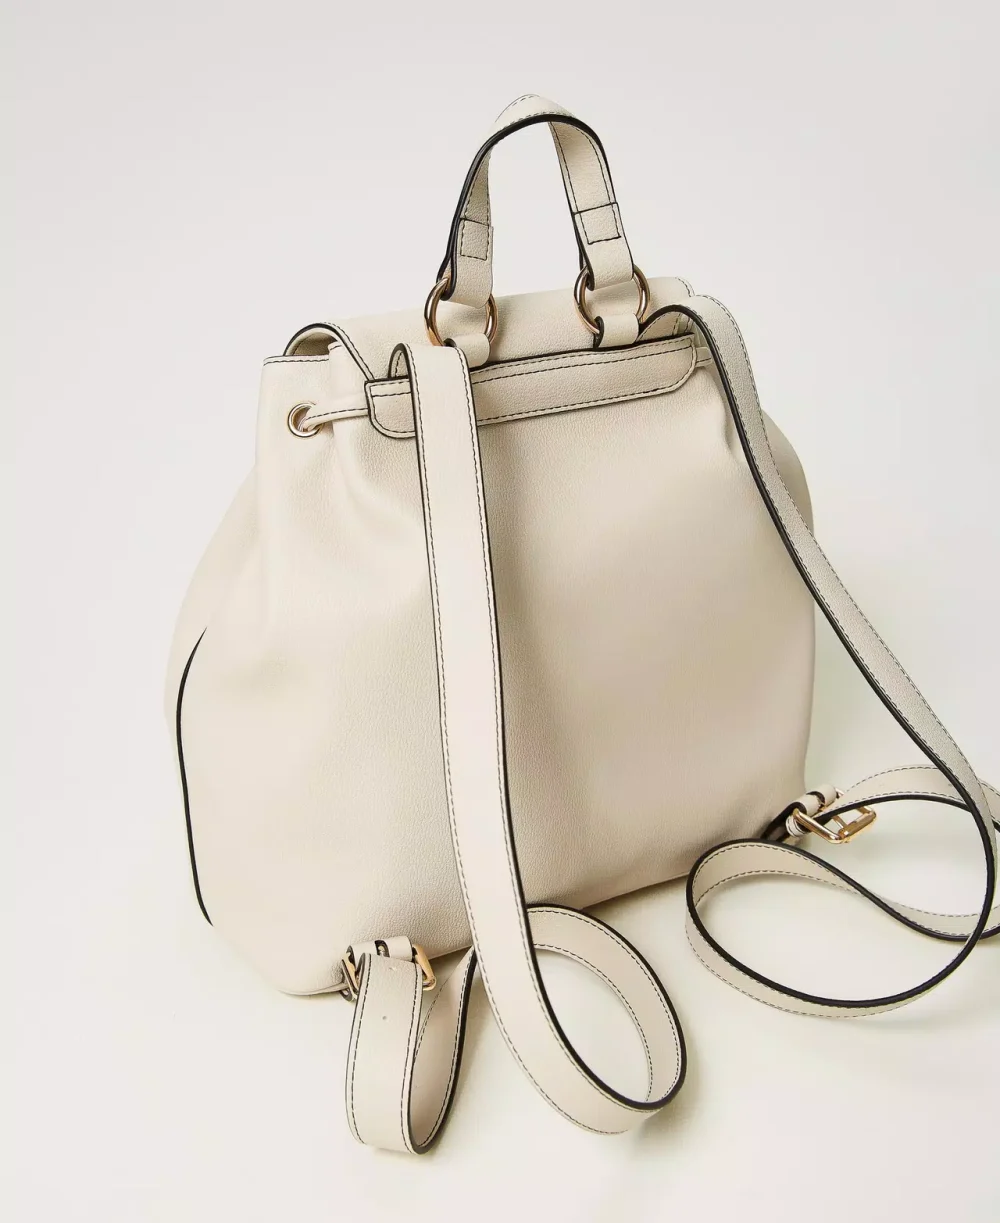 Twinset backpack with pockets and straps